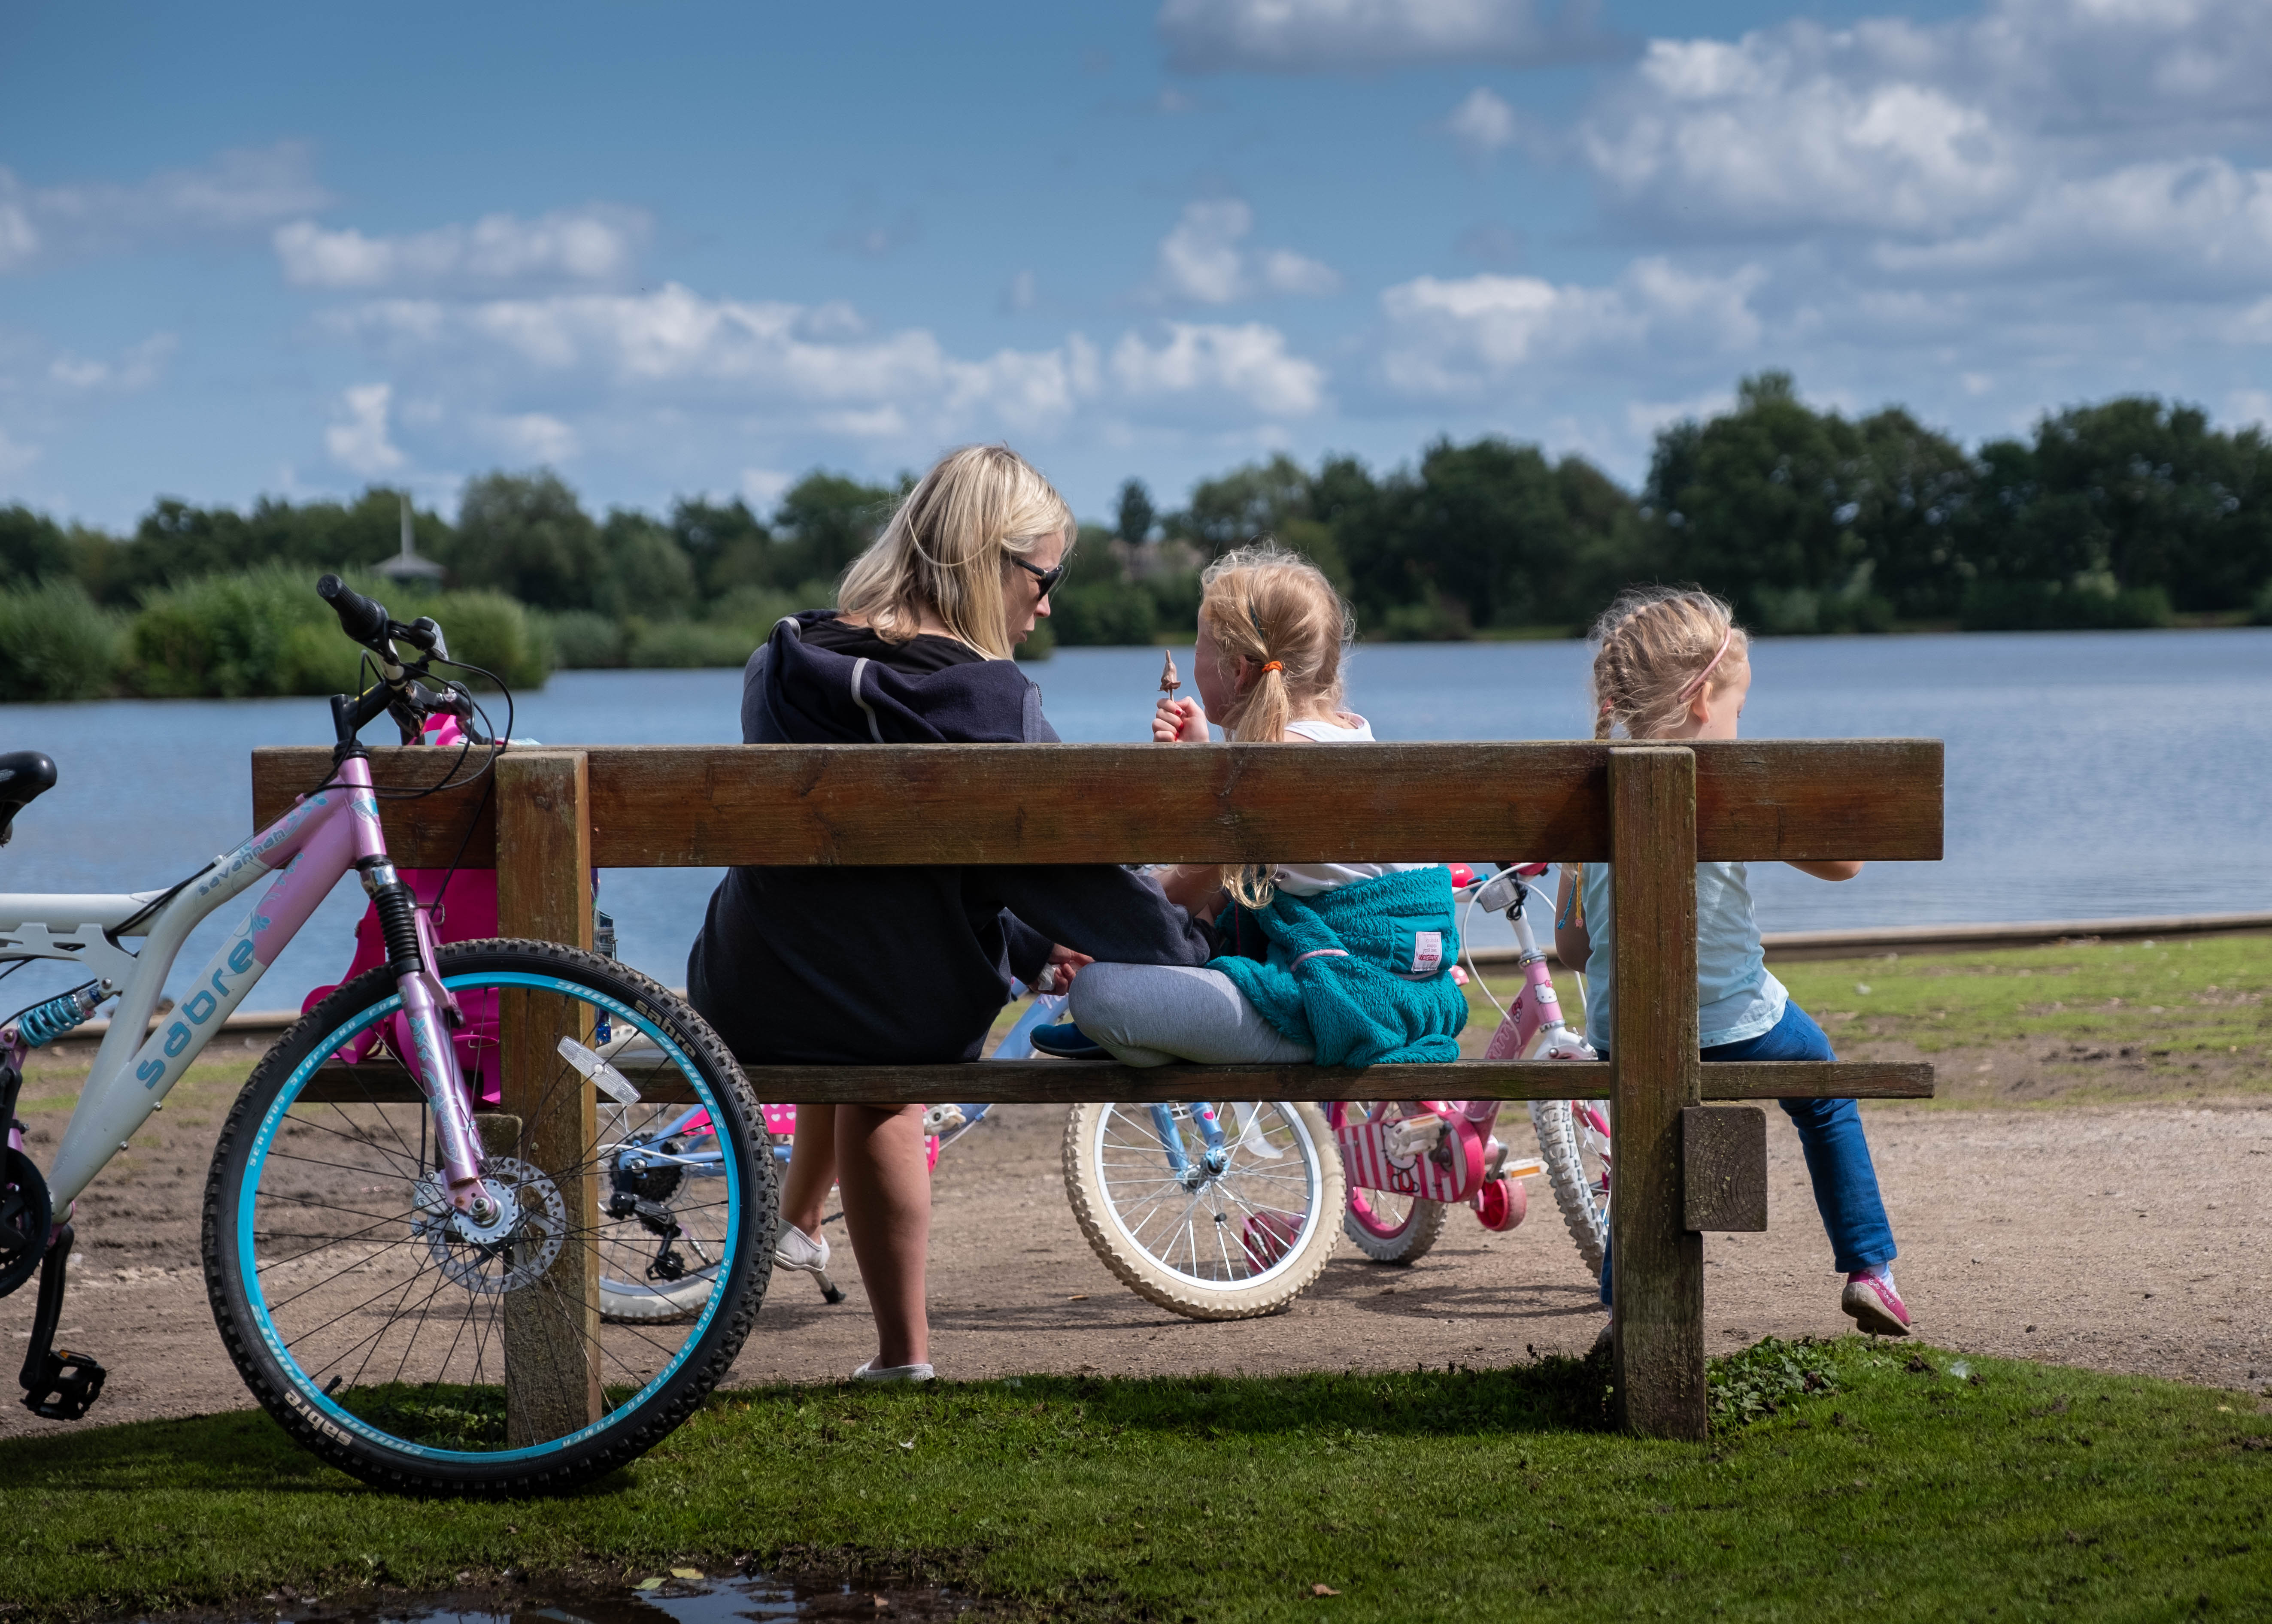 A woman sits on a bench with her two daughters. There are three bicycles in view. The bench faces a lake at Kingsbury Water Park on a clear day.